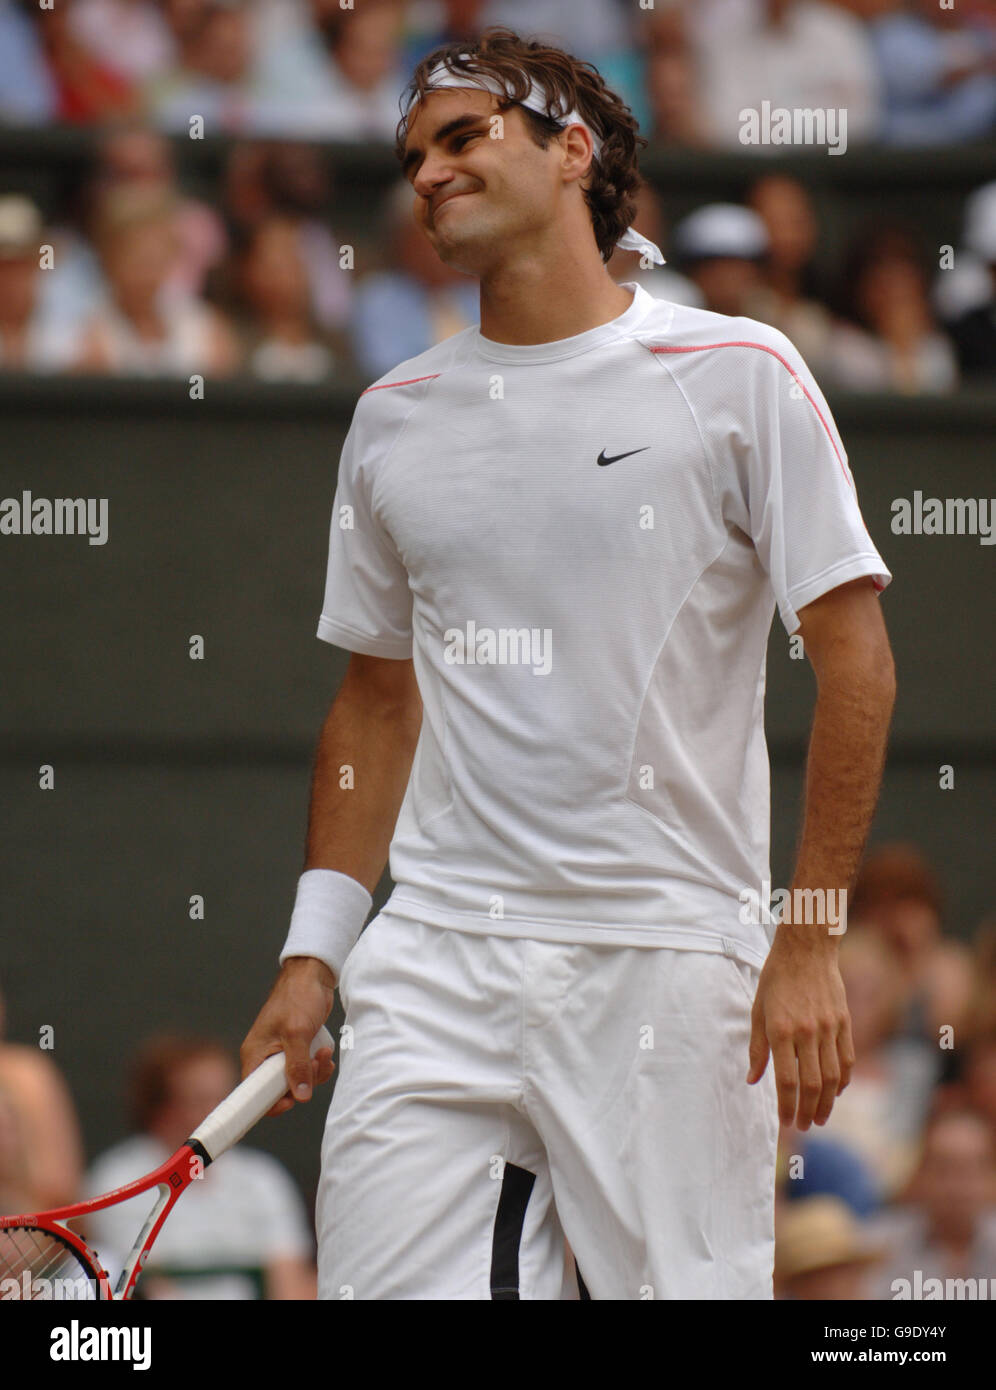 Roger federer v mario ancic hires stock photography and images Alamy